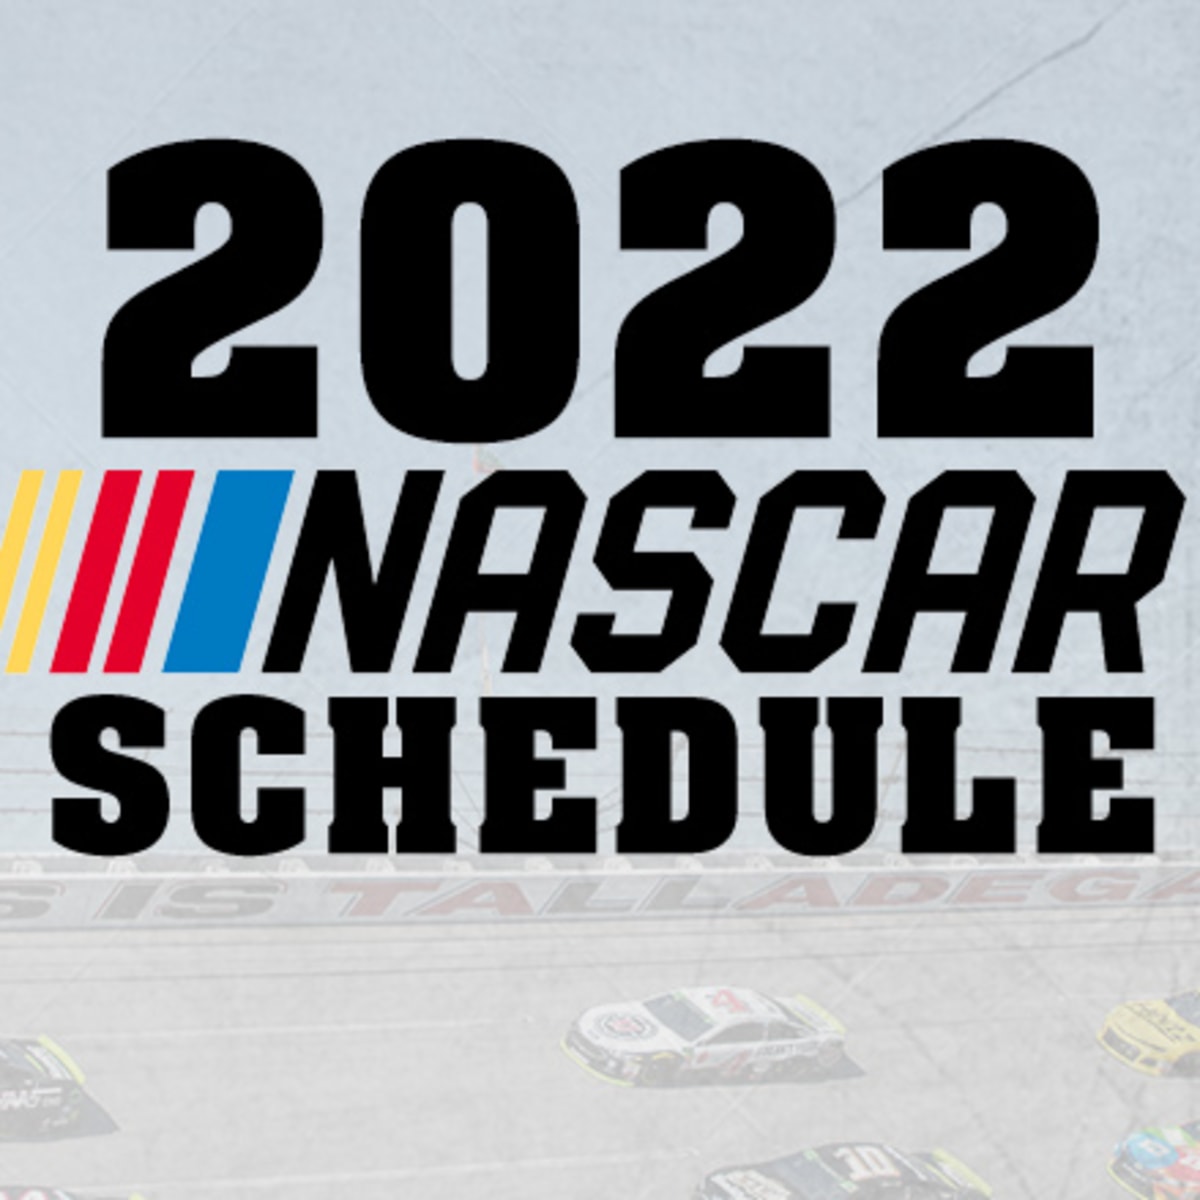 Nascar Race Schedule 2022 2022 Nascar Schedule: Nascar Cup Series - Athlonsports.com | Expert  Predictions, Picks, And Previews